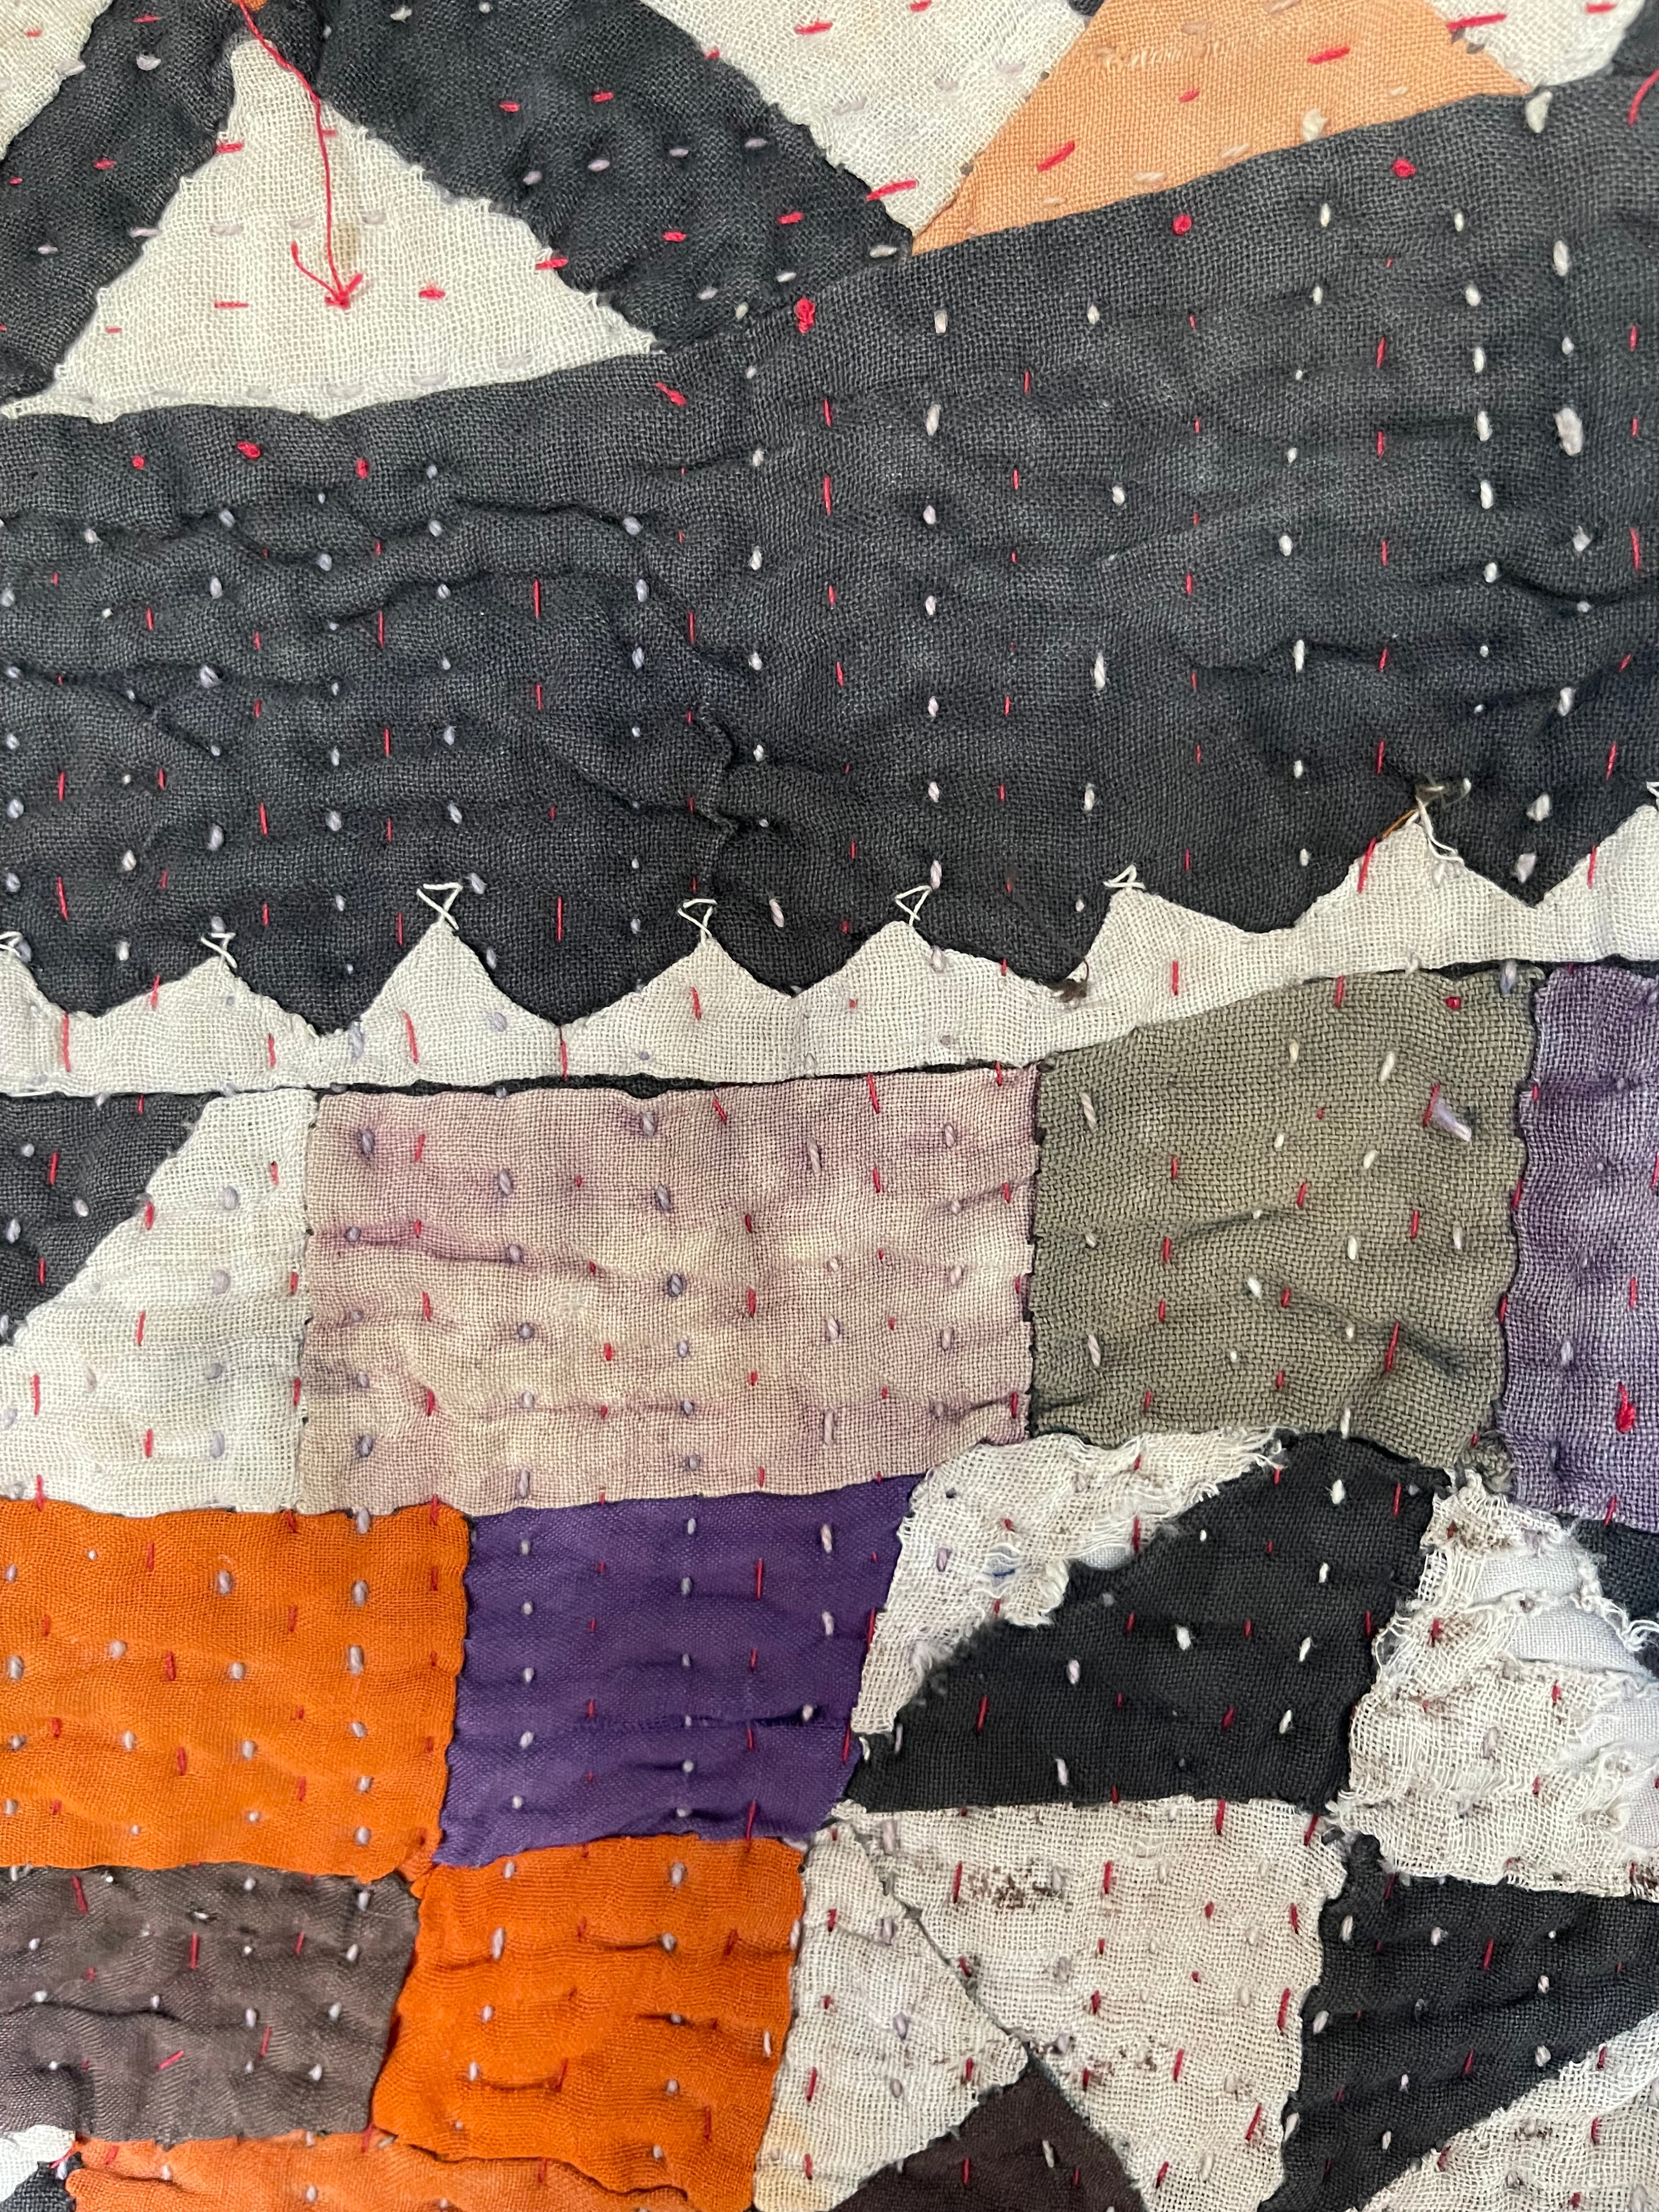 This particular quilt has an unusual combination of triangles and sqaures creating an enchanting and visually disruptive pattern. The reverse a vintage handblock printed piece of fabric that looks like coffee pots printed on the diagonal.